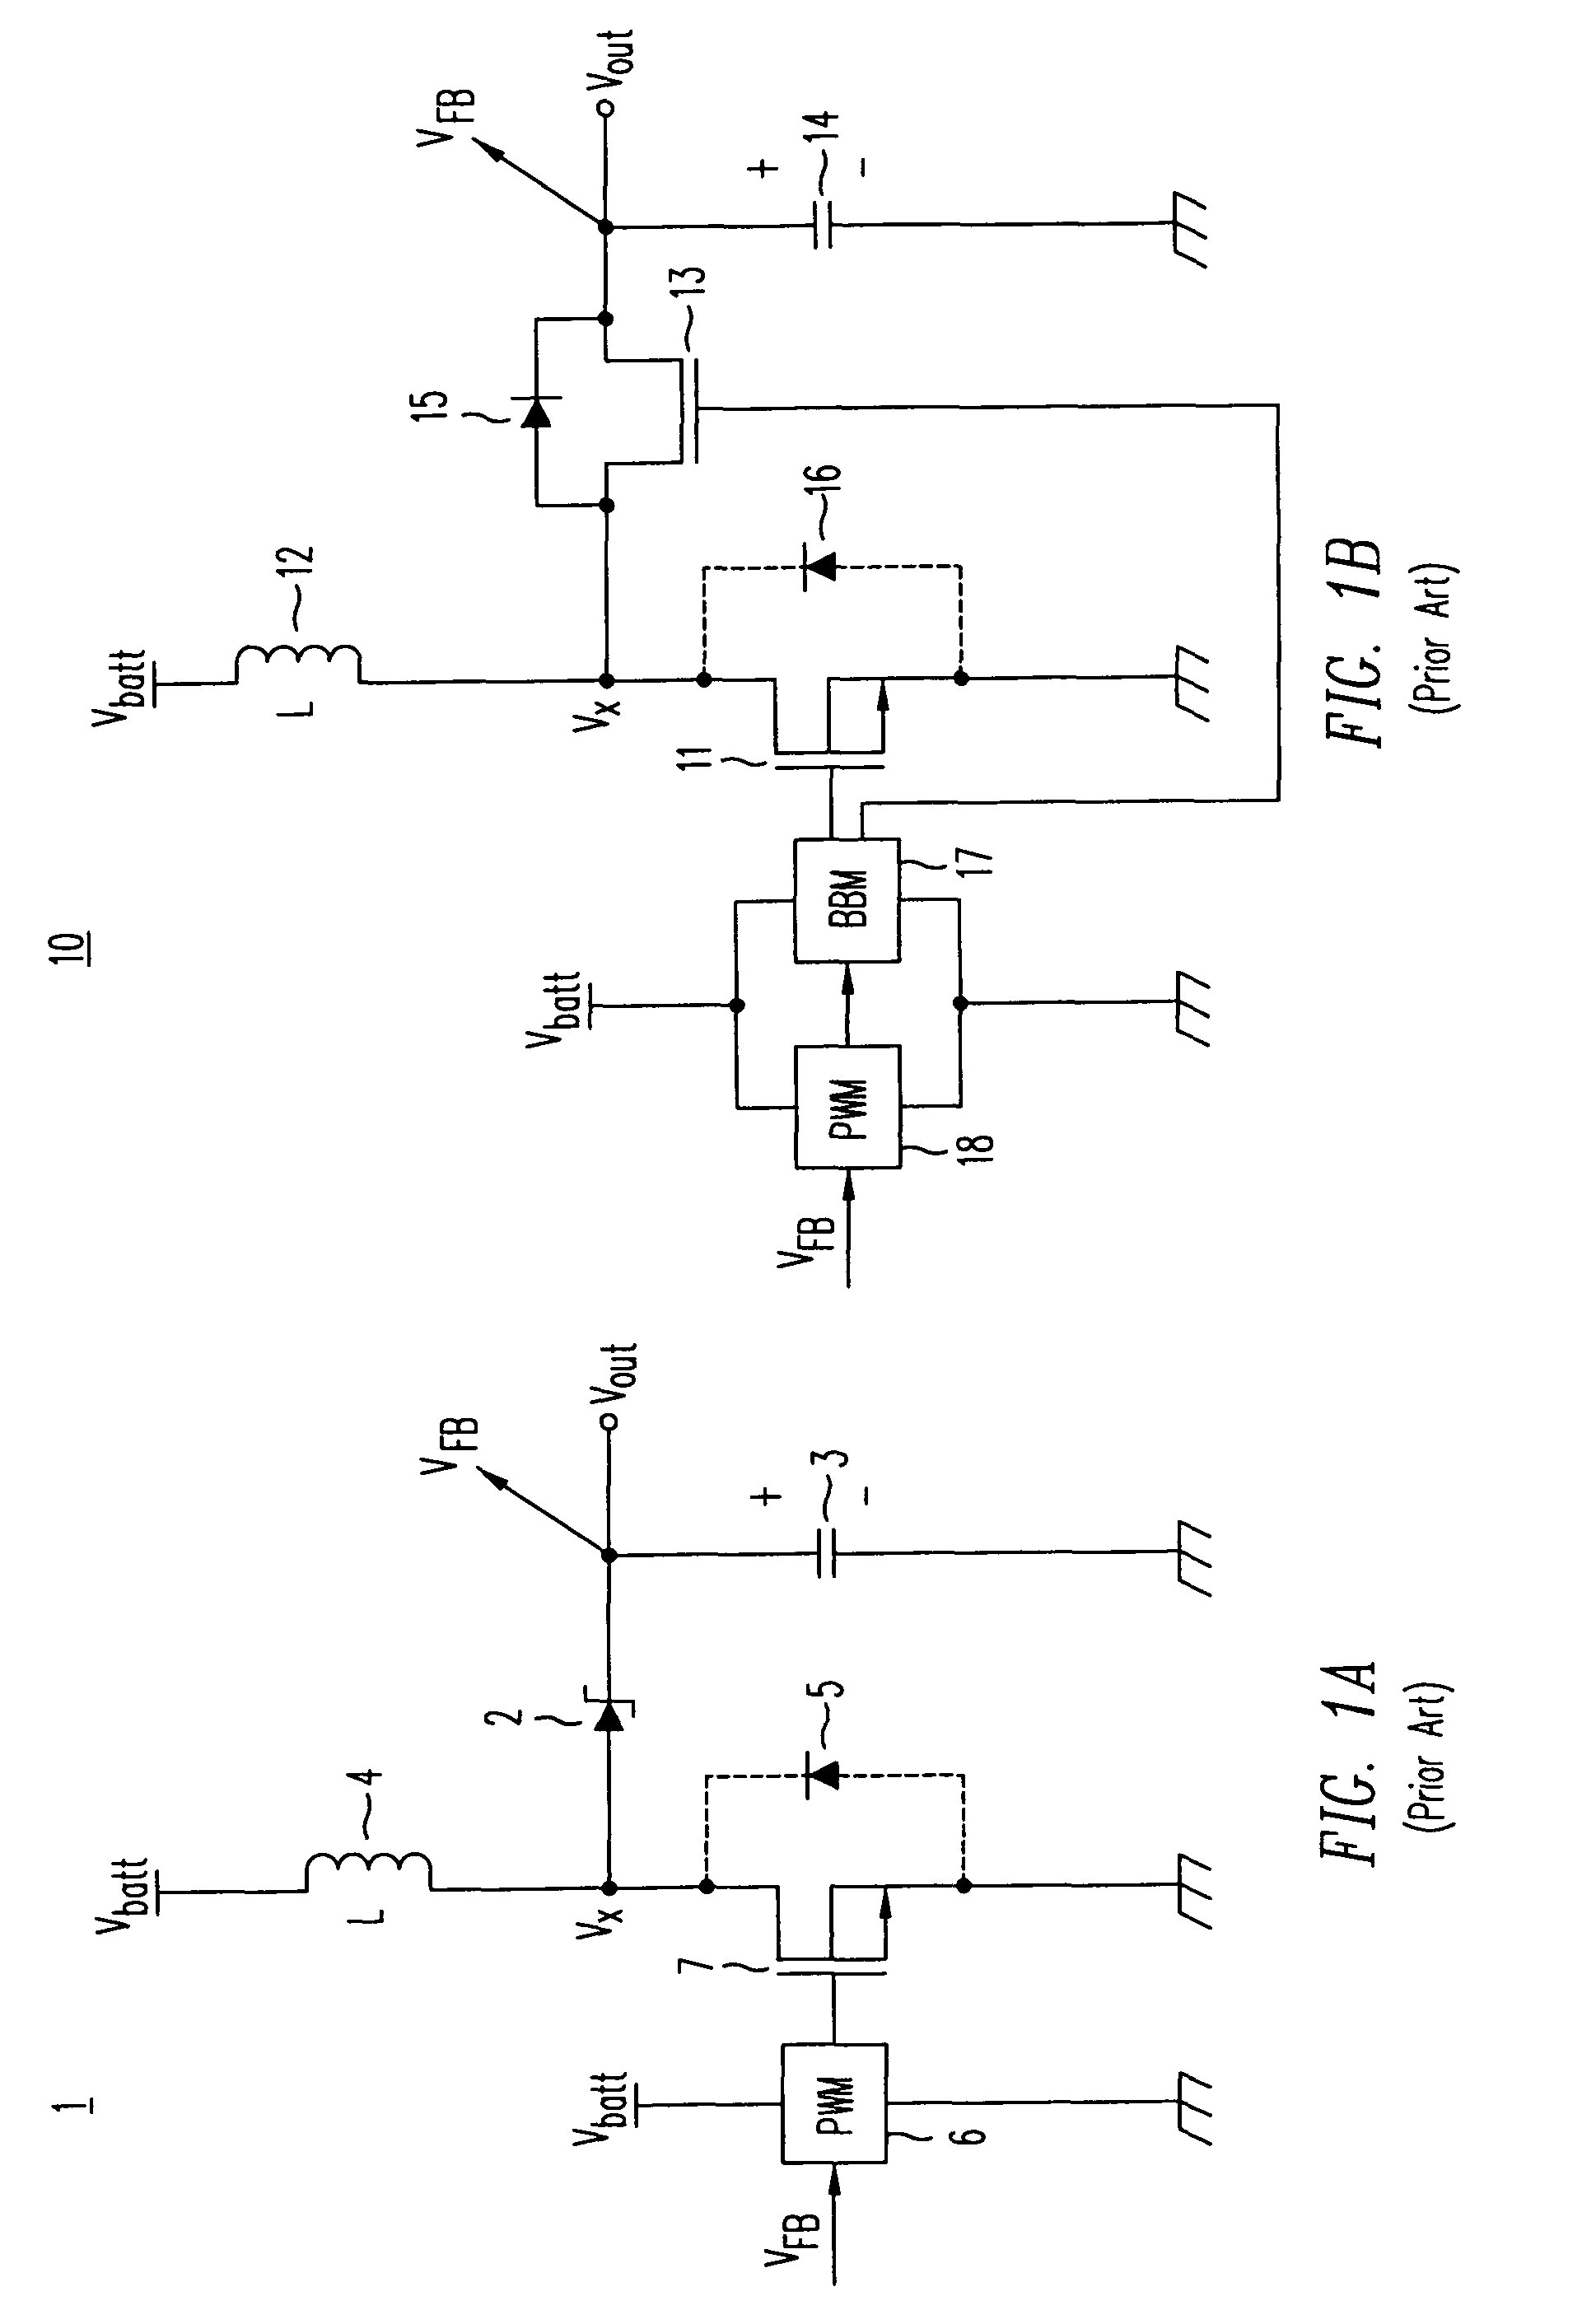 Boost and up-down switching regulator with synchronous freewheeling MOSFET